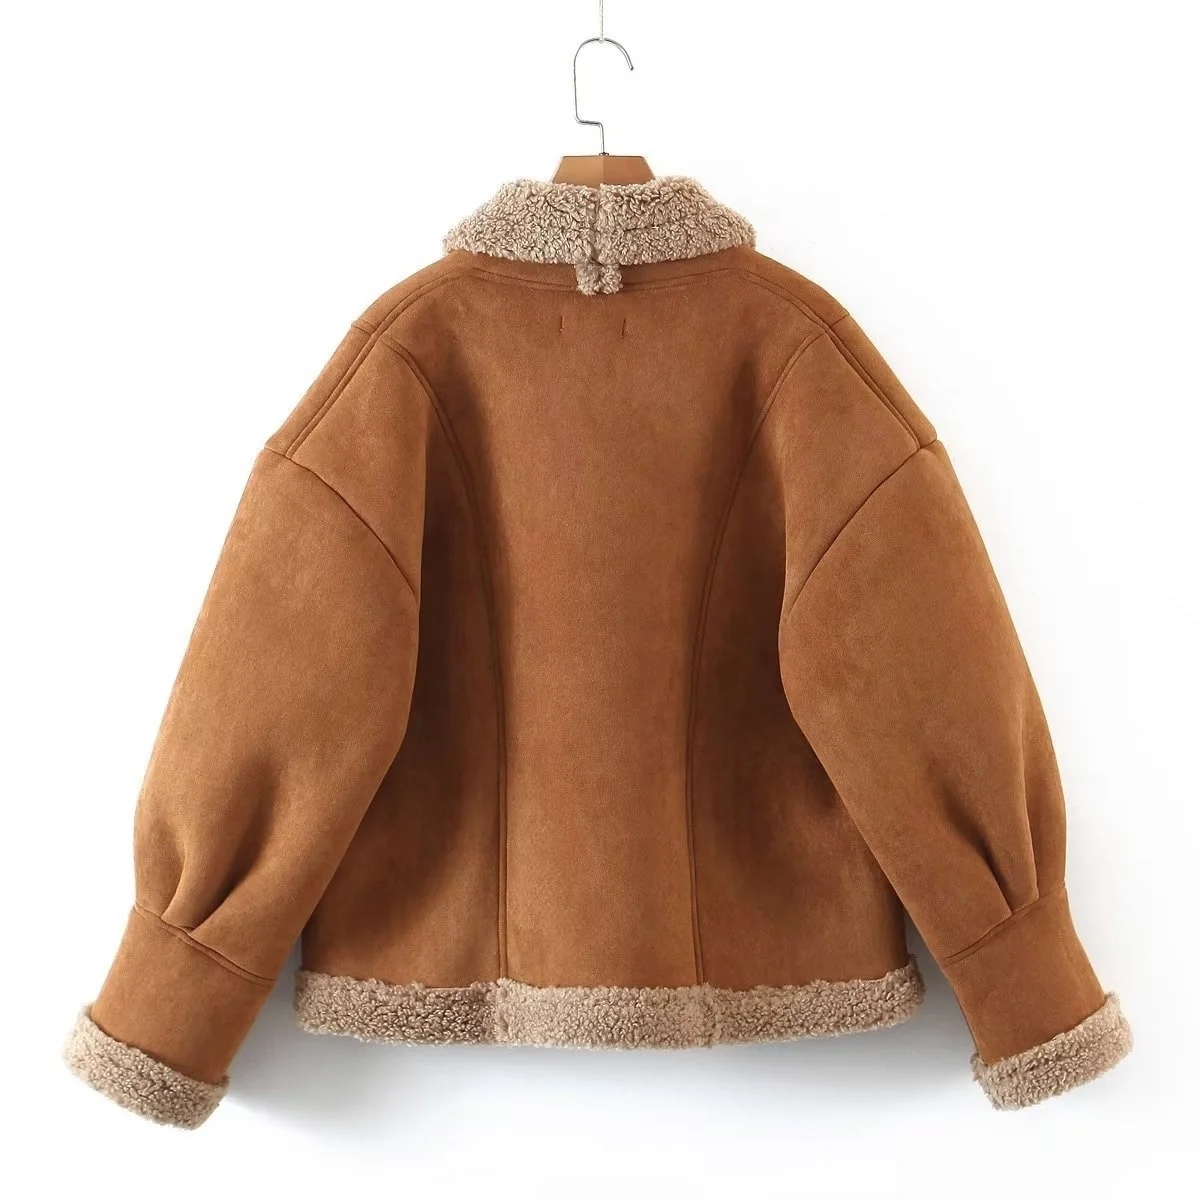 Women's Style New 2022 Fashion Personality Trend Lamb Wool Foreign Short Coat Leather Jacket Female enlarge